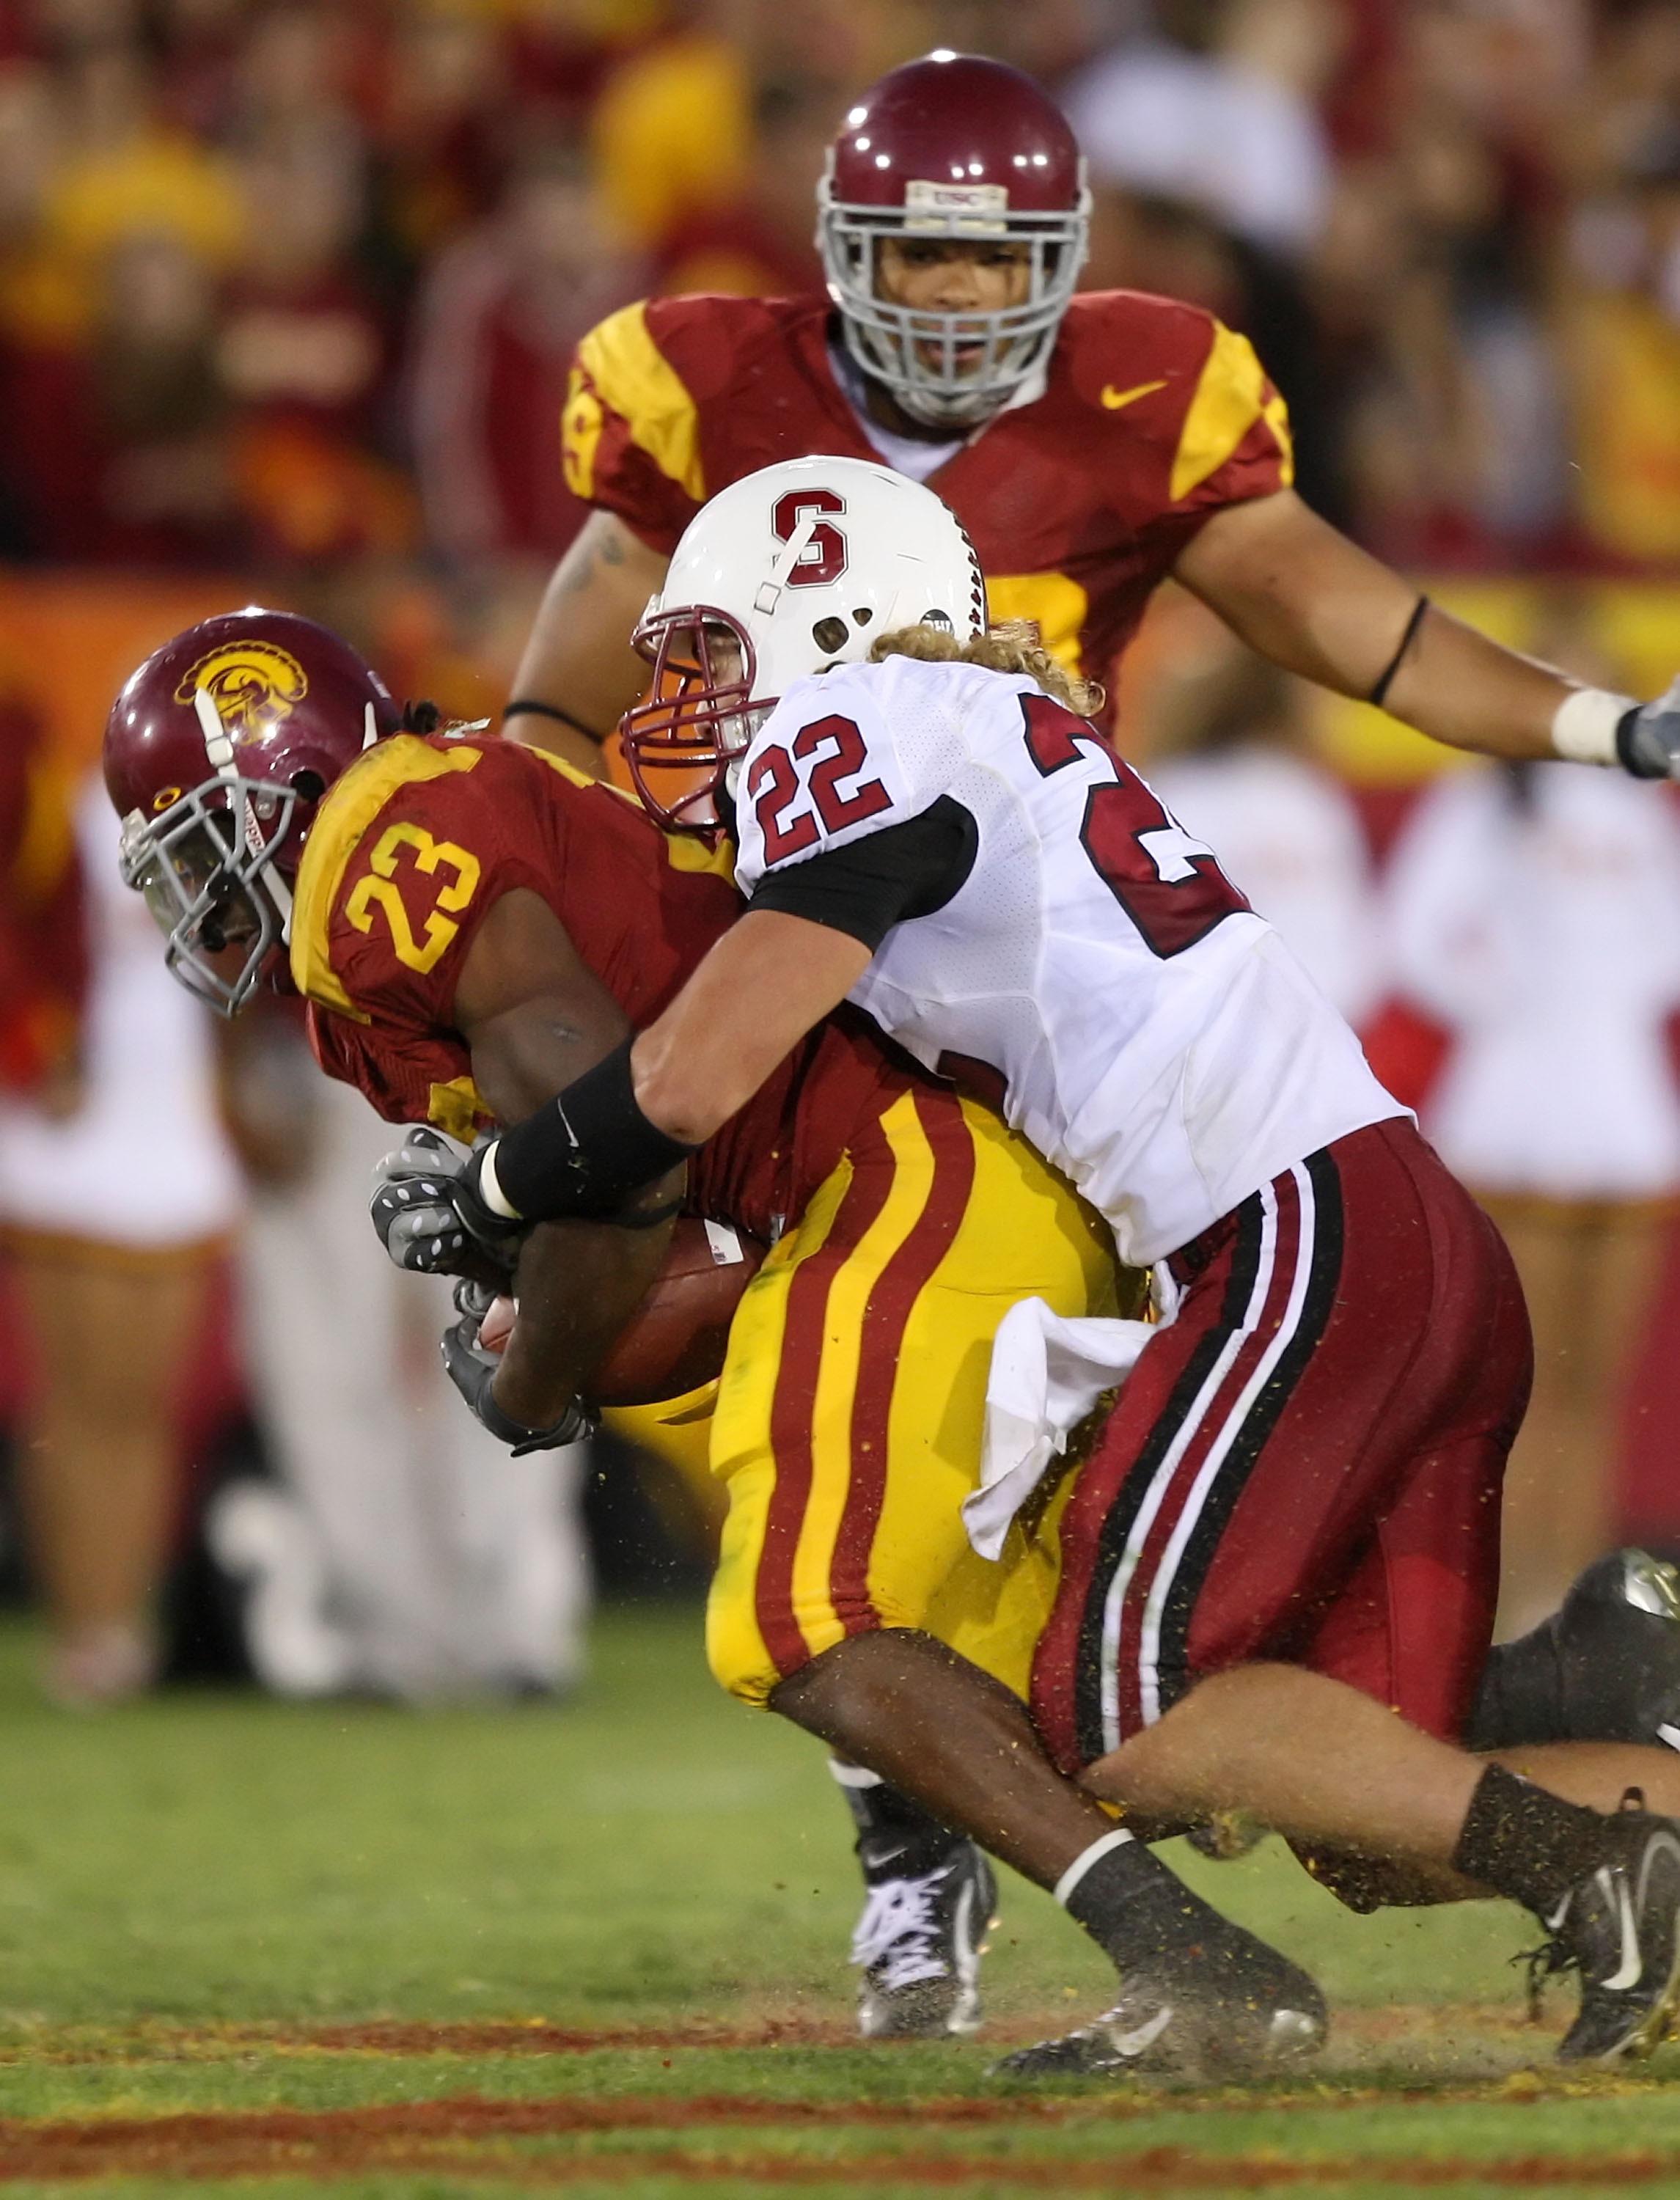 LOS ANGELES - OCTOBER 6:  Bo McNally #22 of the Stanford University Cardinal tackles Chauncey Washington #23 of the USC Trojans at the Los Angeles Memorial Coliseum October 6, 2007 in Los Angeles, California.  (Photo by Lisa Blumenfeld/Getty Images)